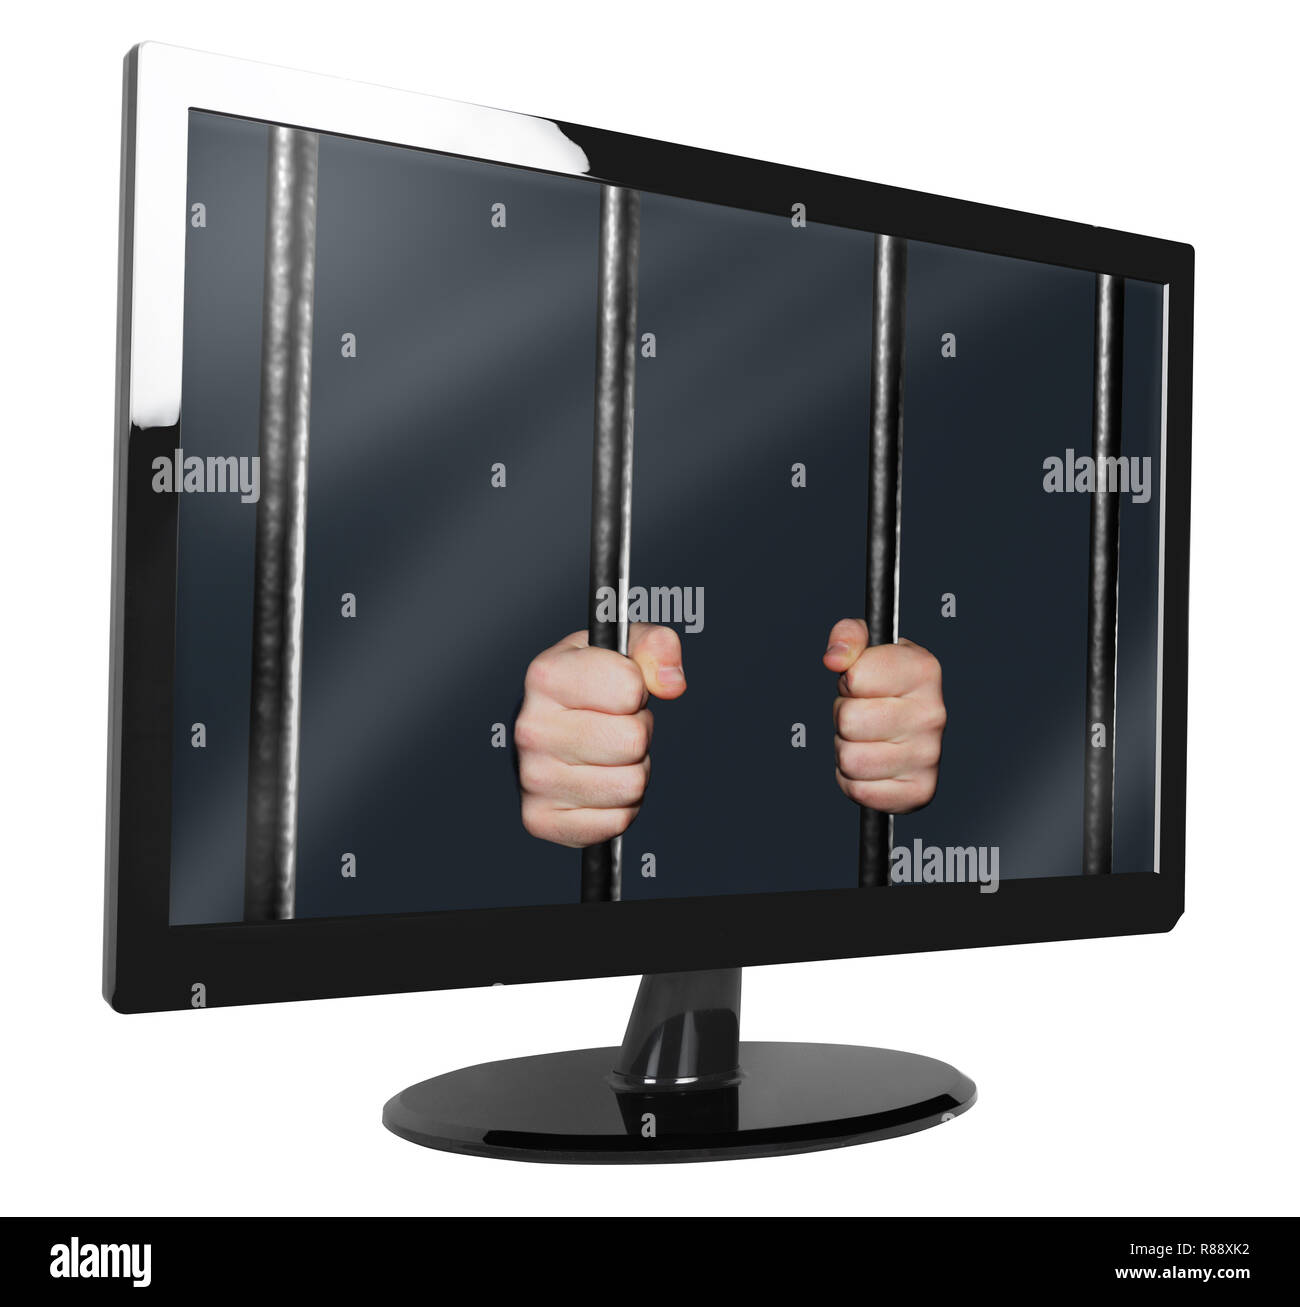 Monitor with Hands holding Jail Bars on screen, isolated on white 3d illustration Stock Photo